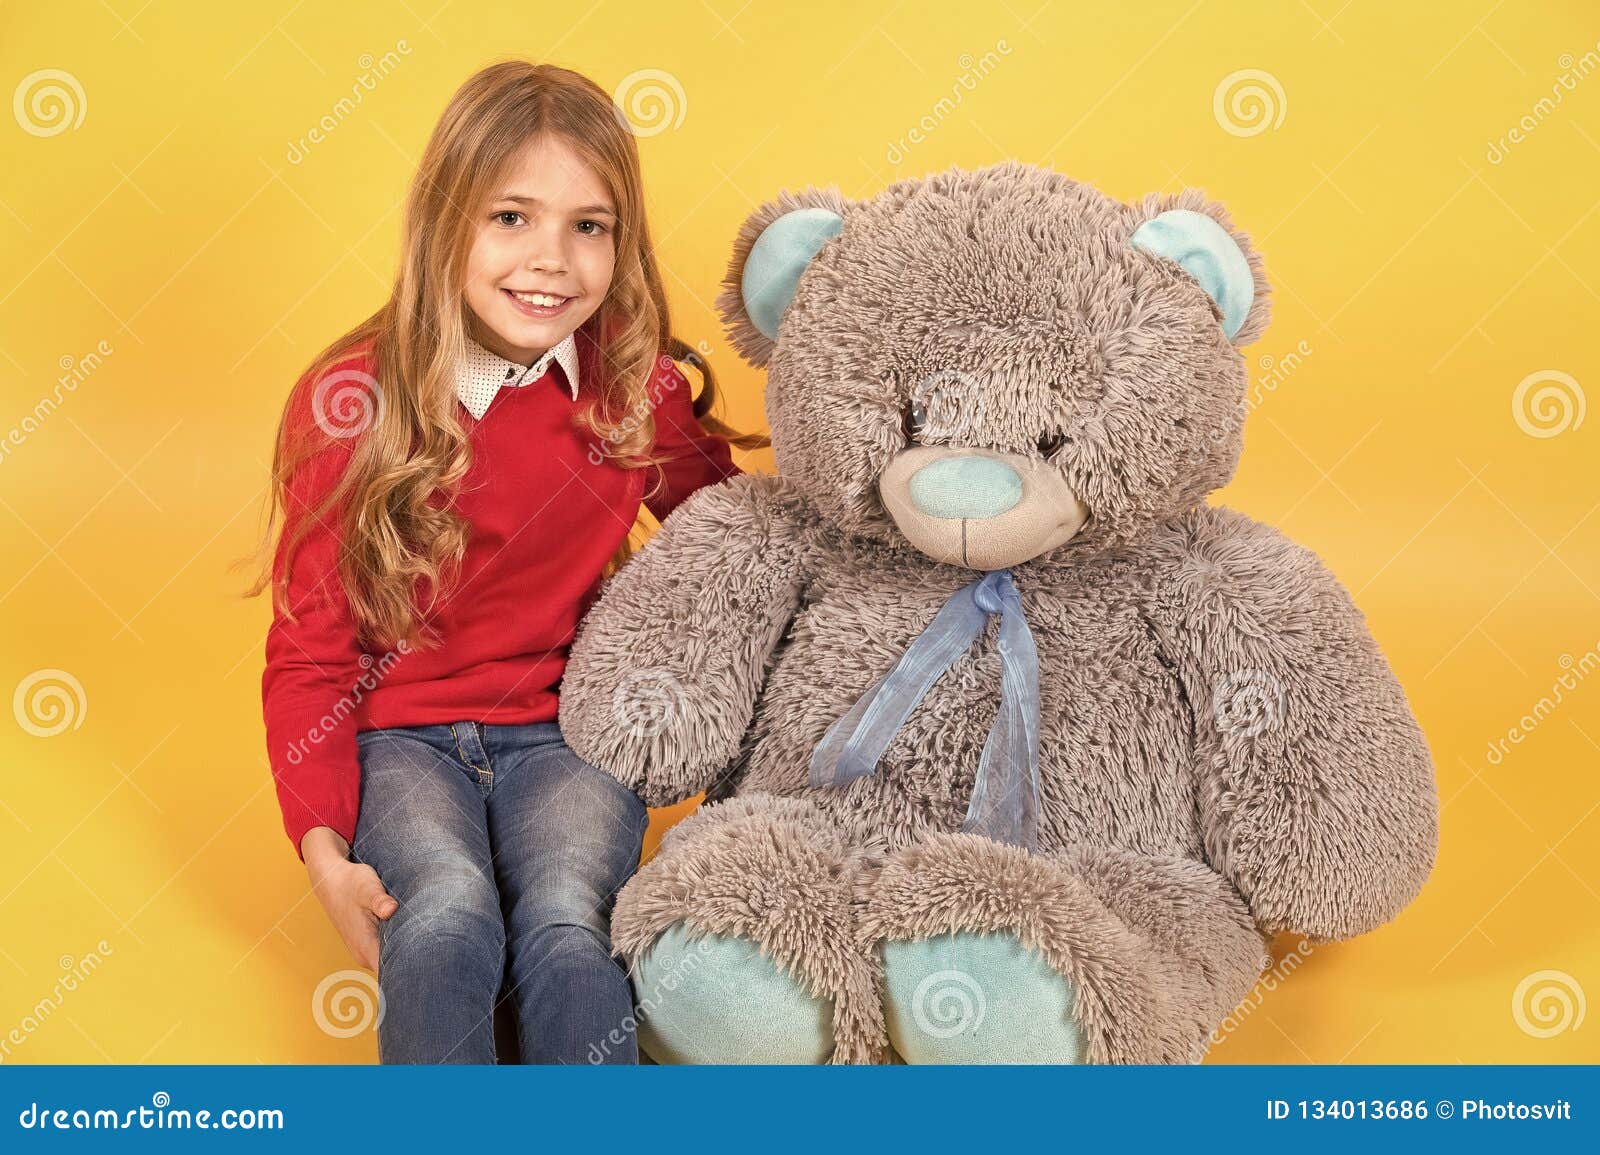 Child Smile with Grey Soft Toy Stock Photo - Image of bear, soft: 134013686